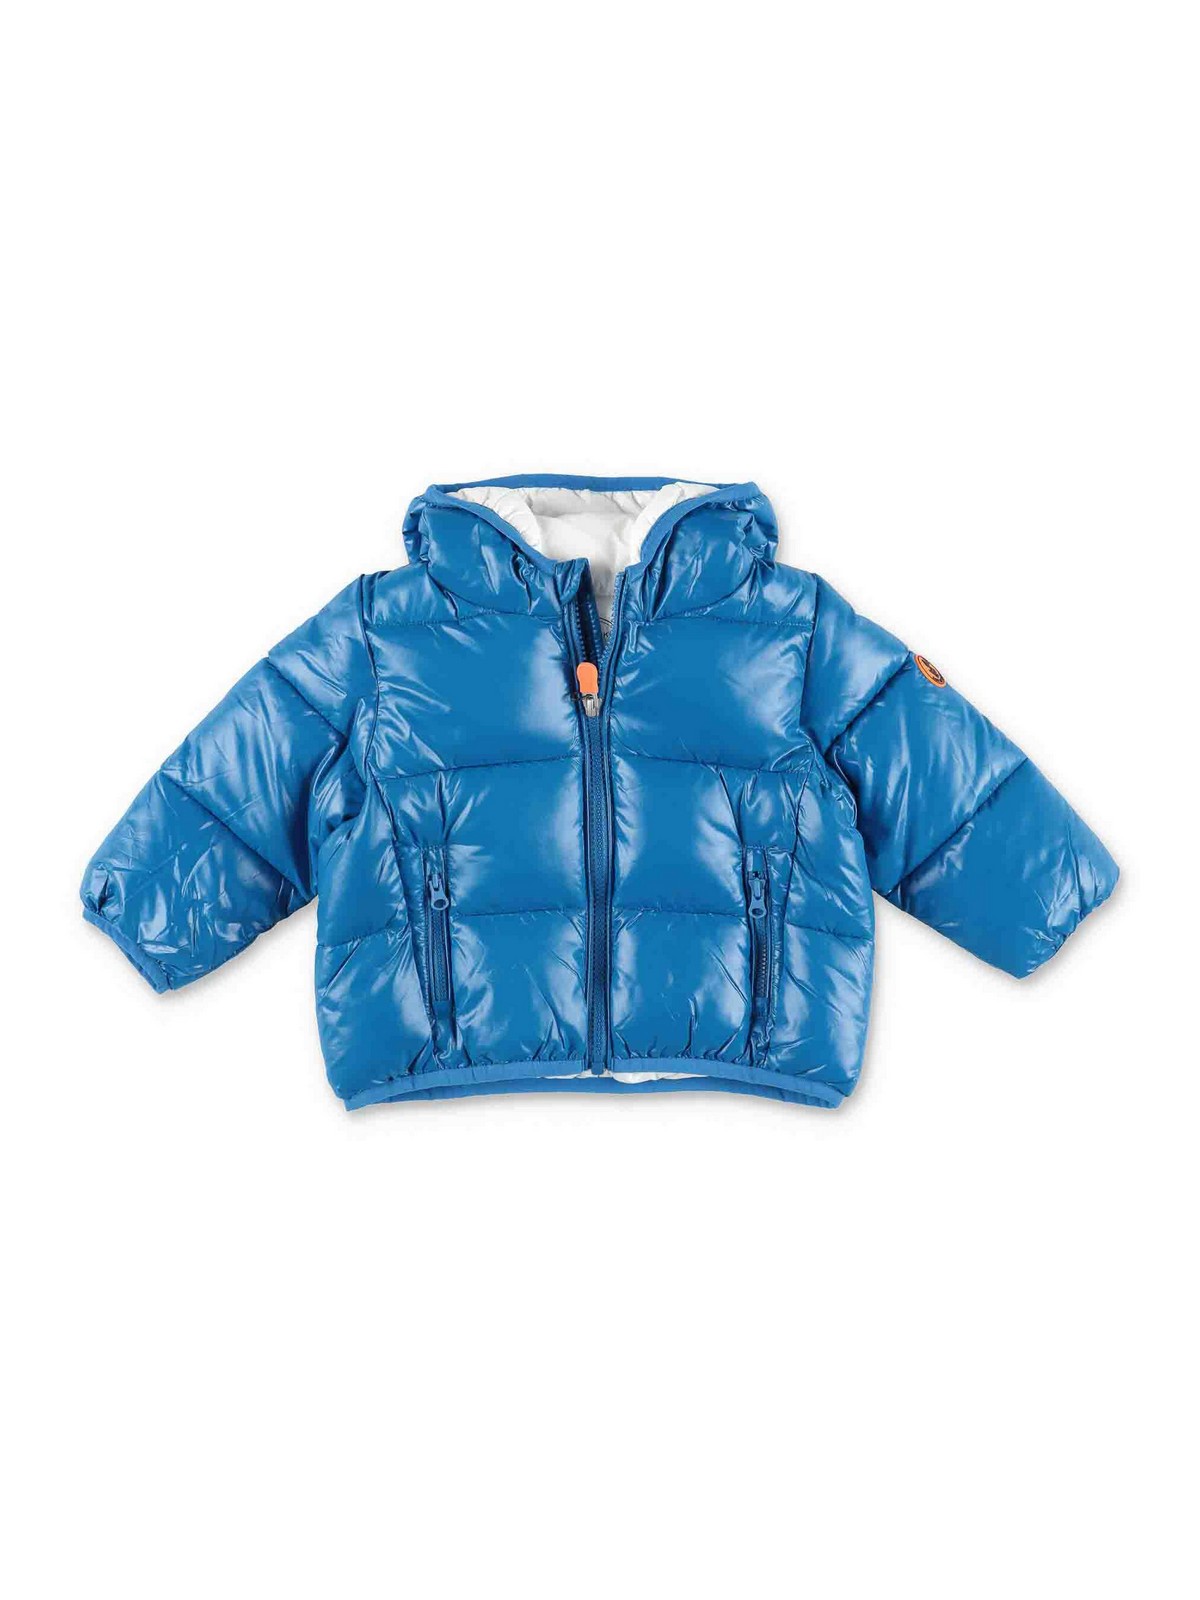 Save The Duck Kids' Royal Blue Baby Boy Jacket